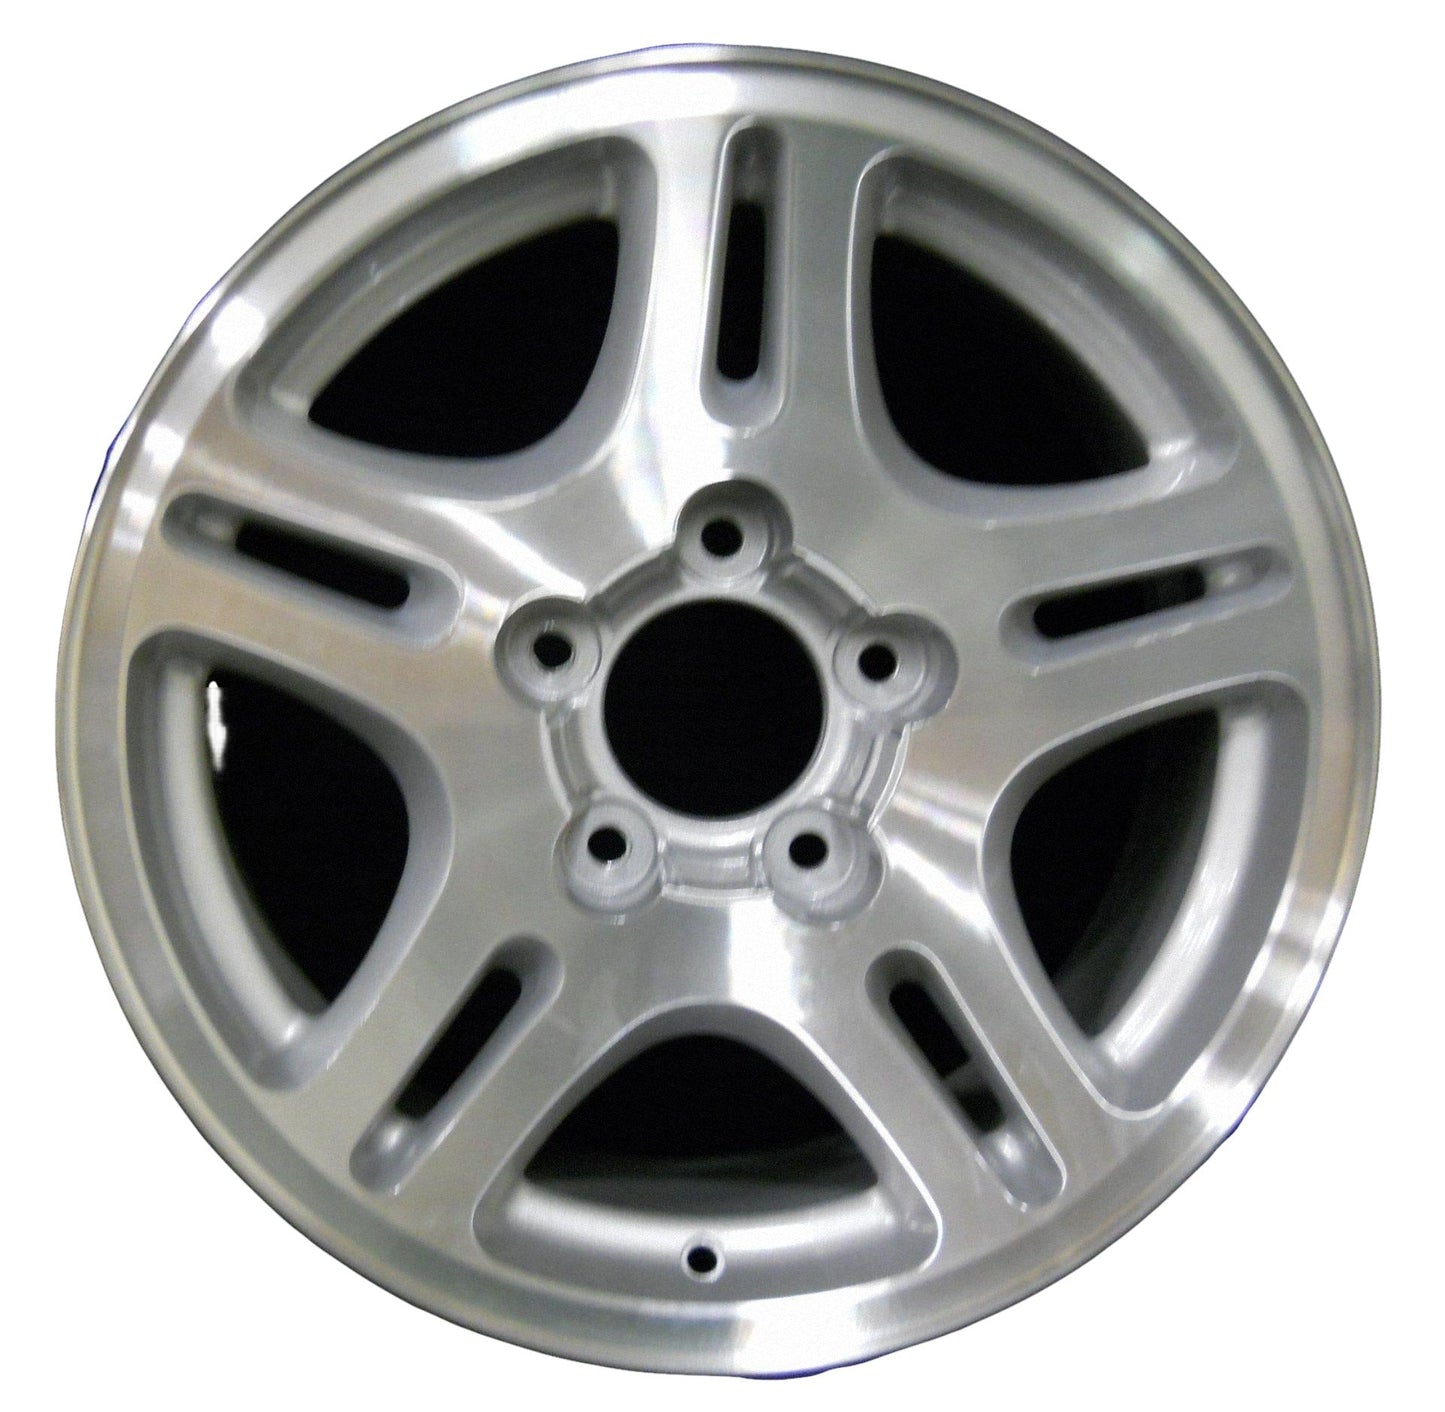 Lincoln Navigator  2000, 2001, 2002 Factory OEM Car Wheel Size 17x7.5 Alloy WAO.3467.PS02.MA